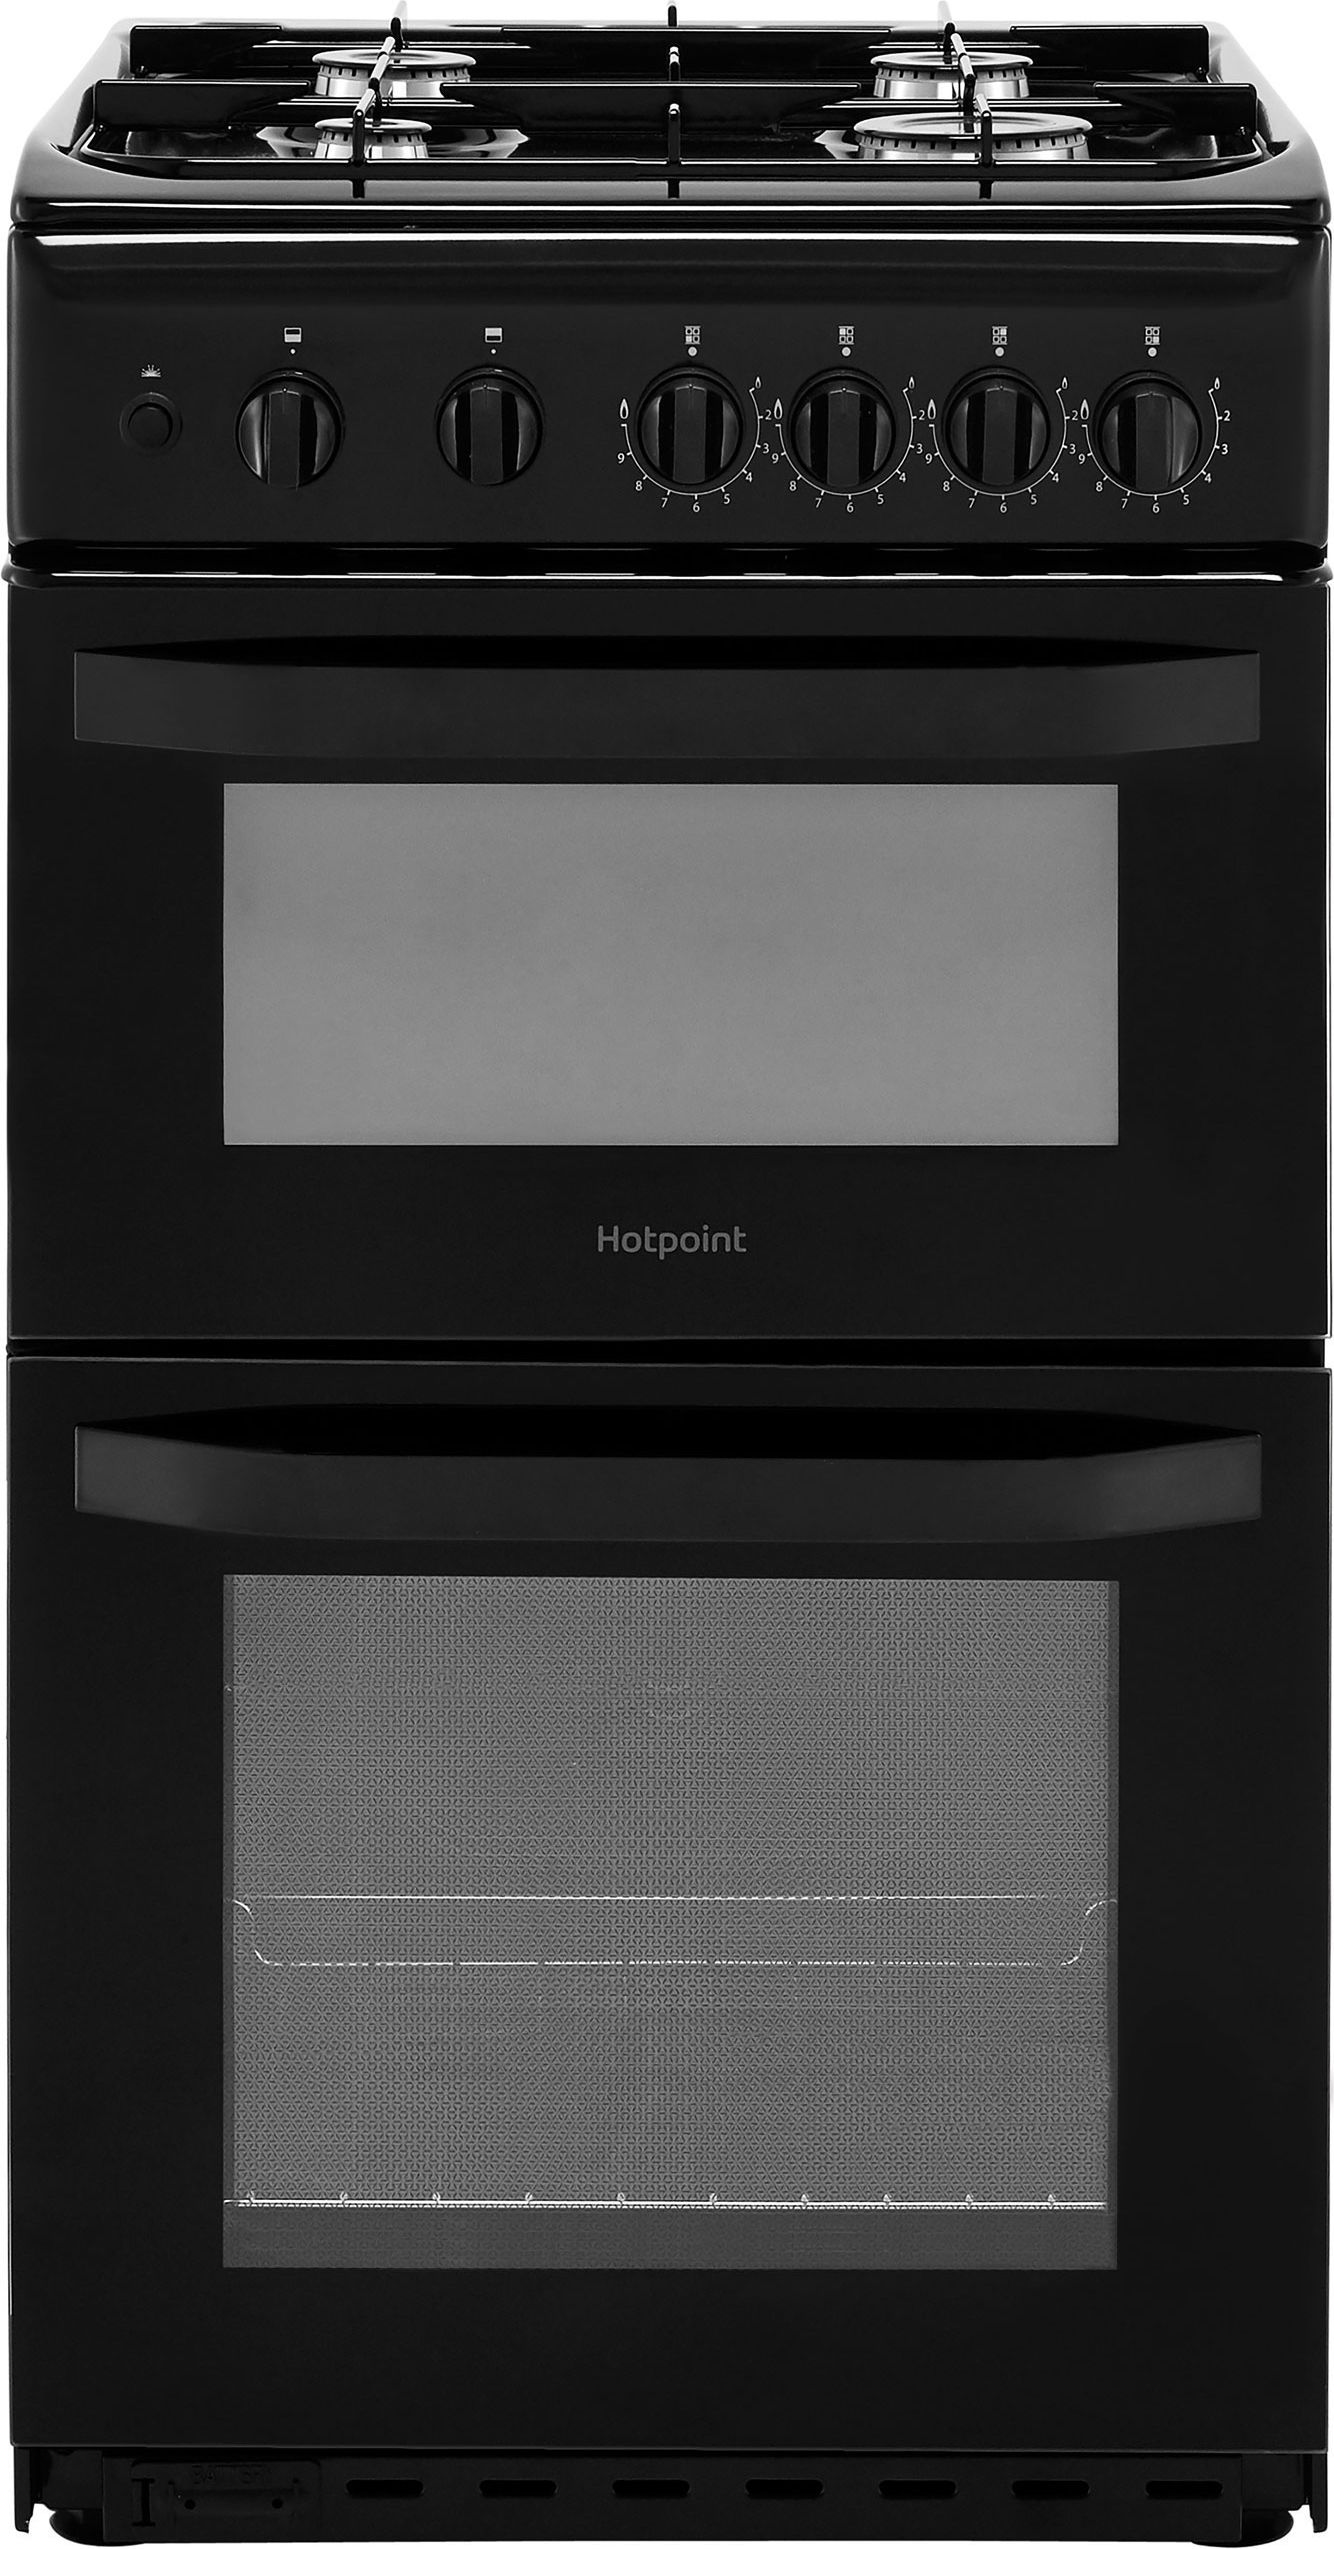 Hotpoint Cloe HD5G00KCB 50cm Freestanding Gas Cooker with Full Width Gas Grill - Black - A Rated, Black